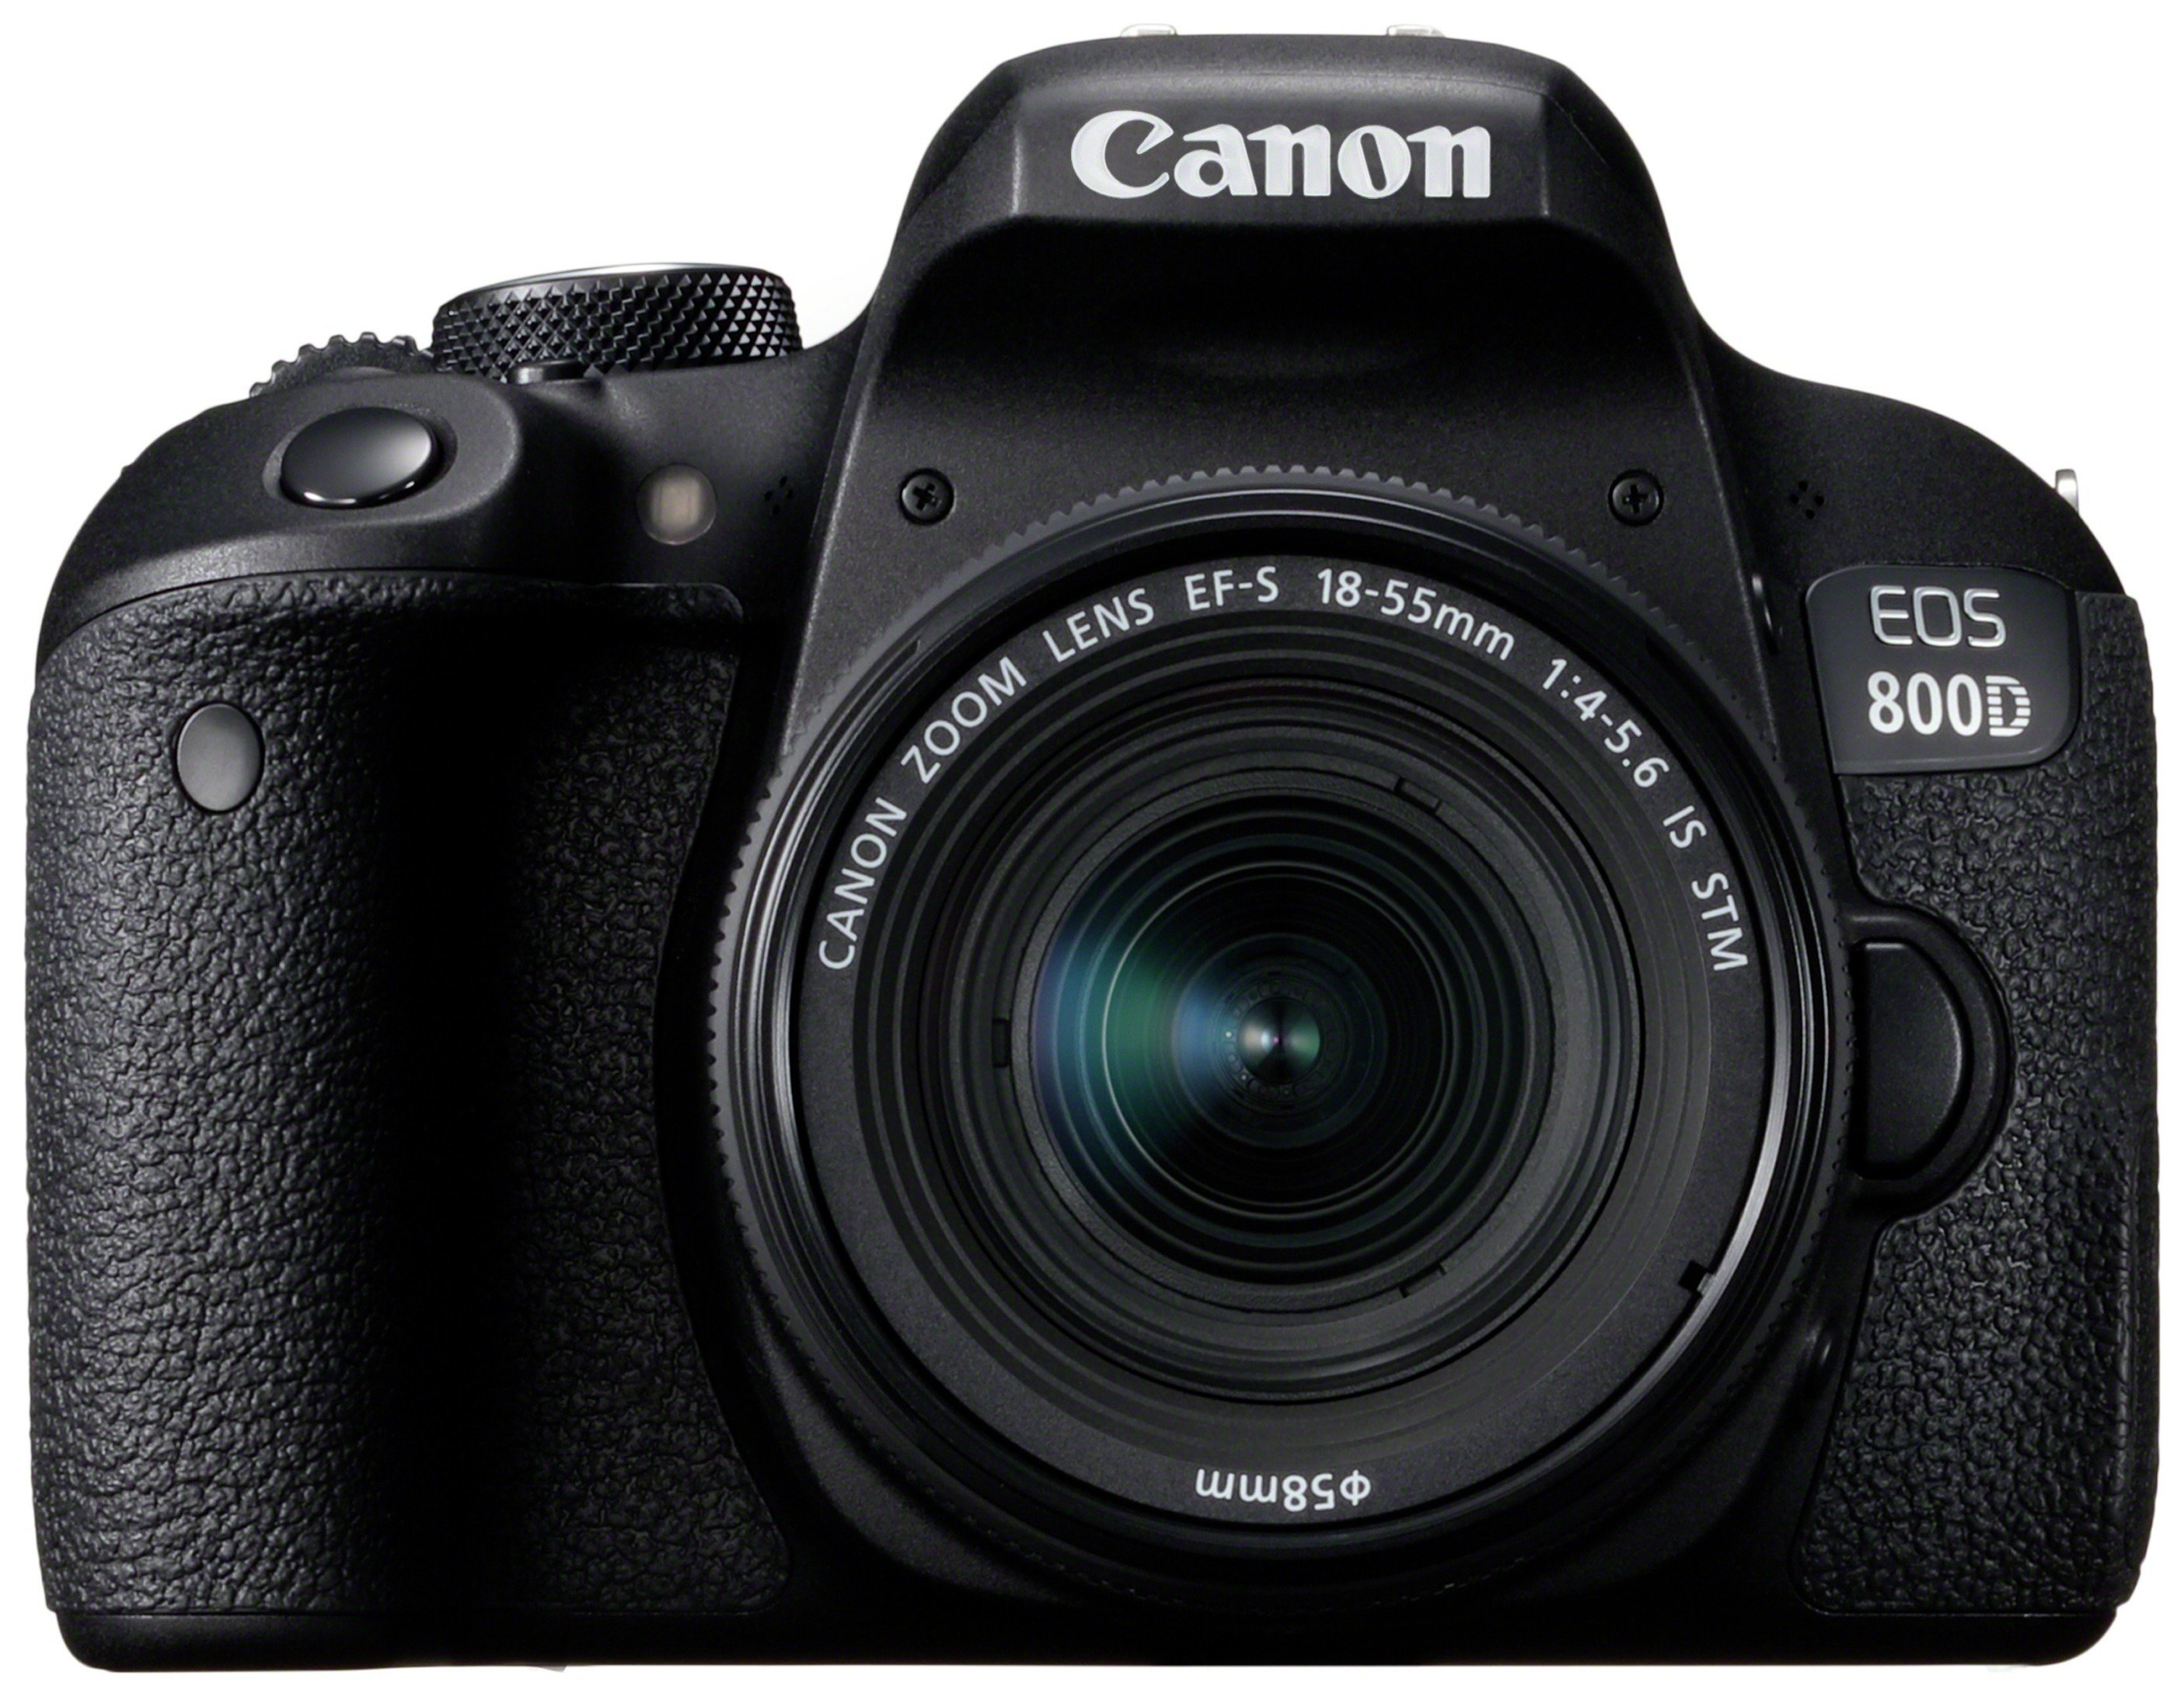 Canon EOS 800D DSLR Camera with 18-55mm Lens Review